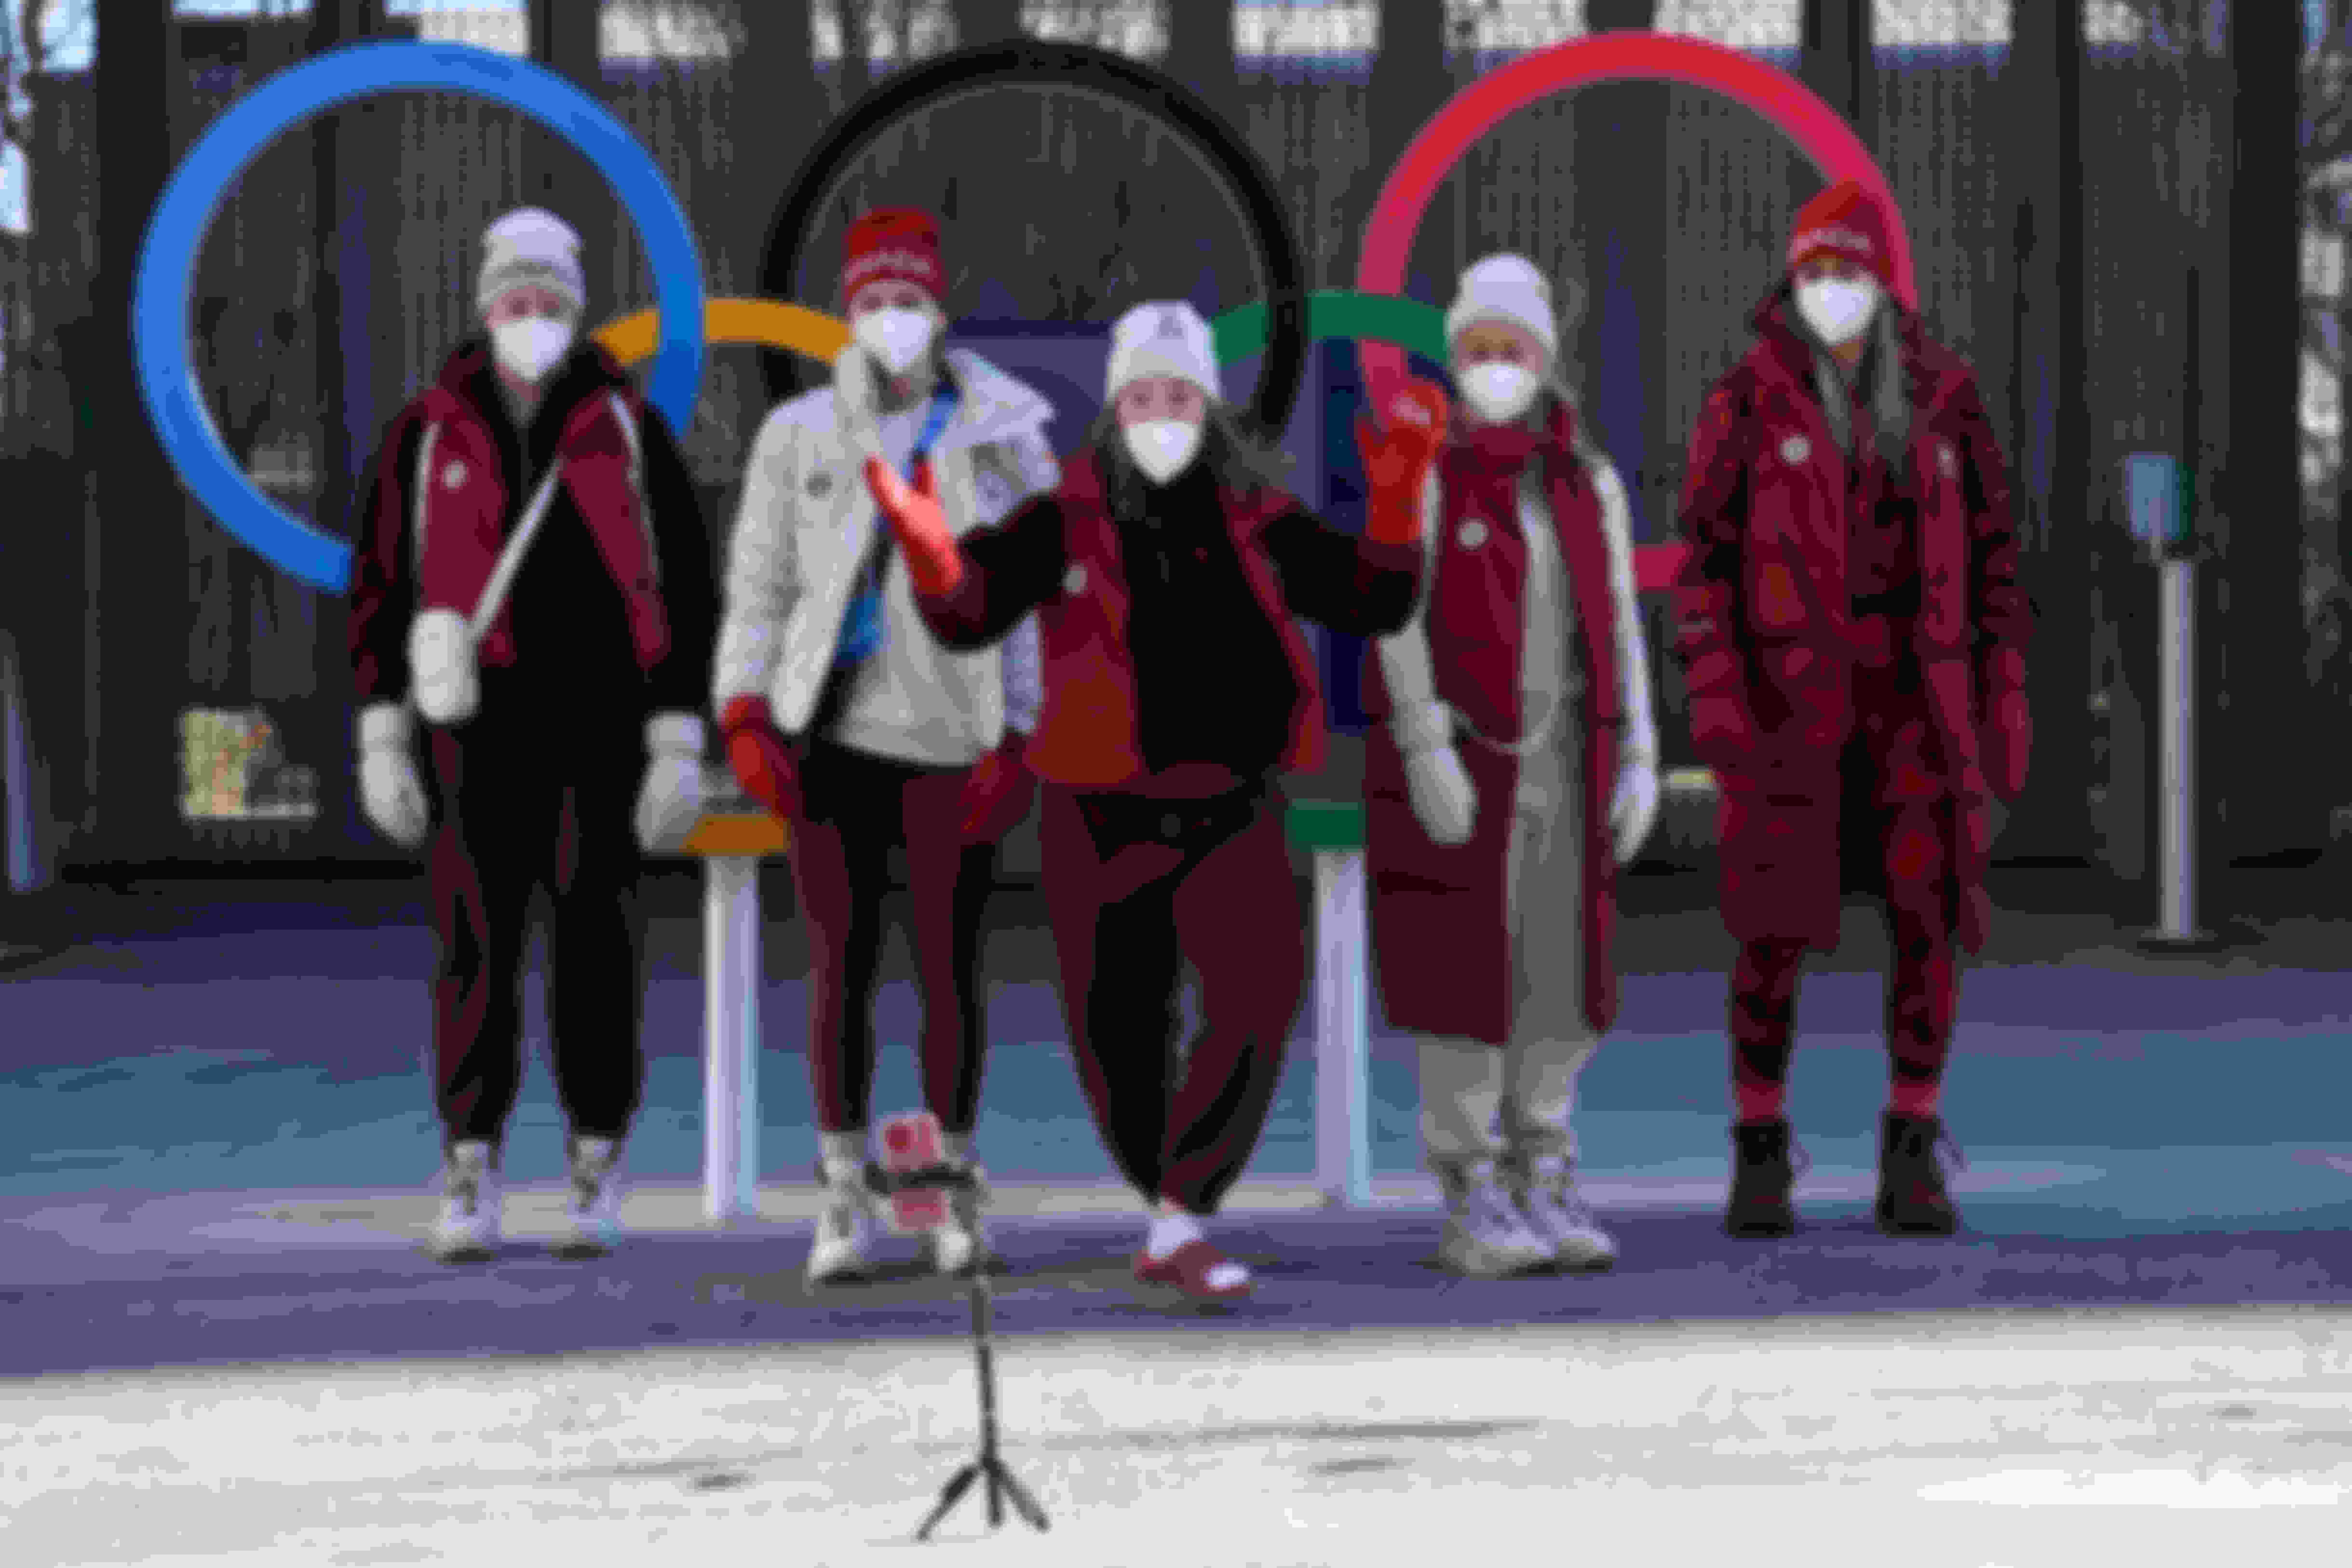 Members of Canada's team at the Beijing 2022 Winter Olympic Games village.